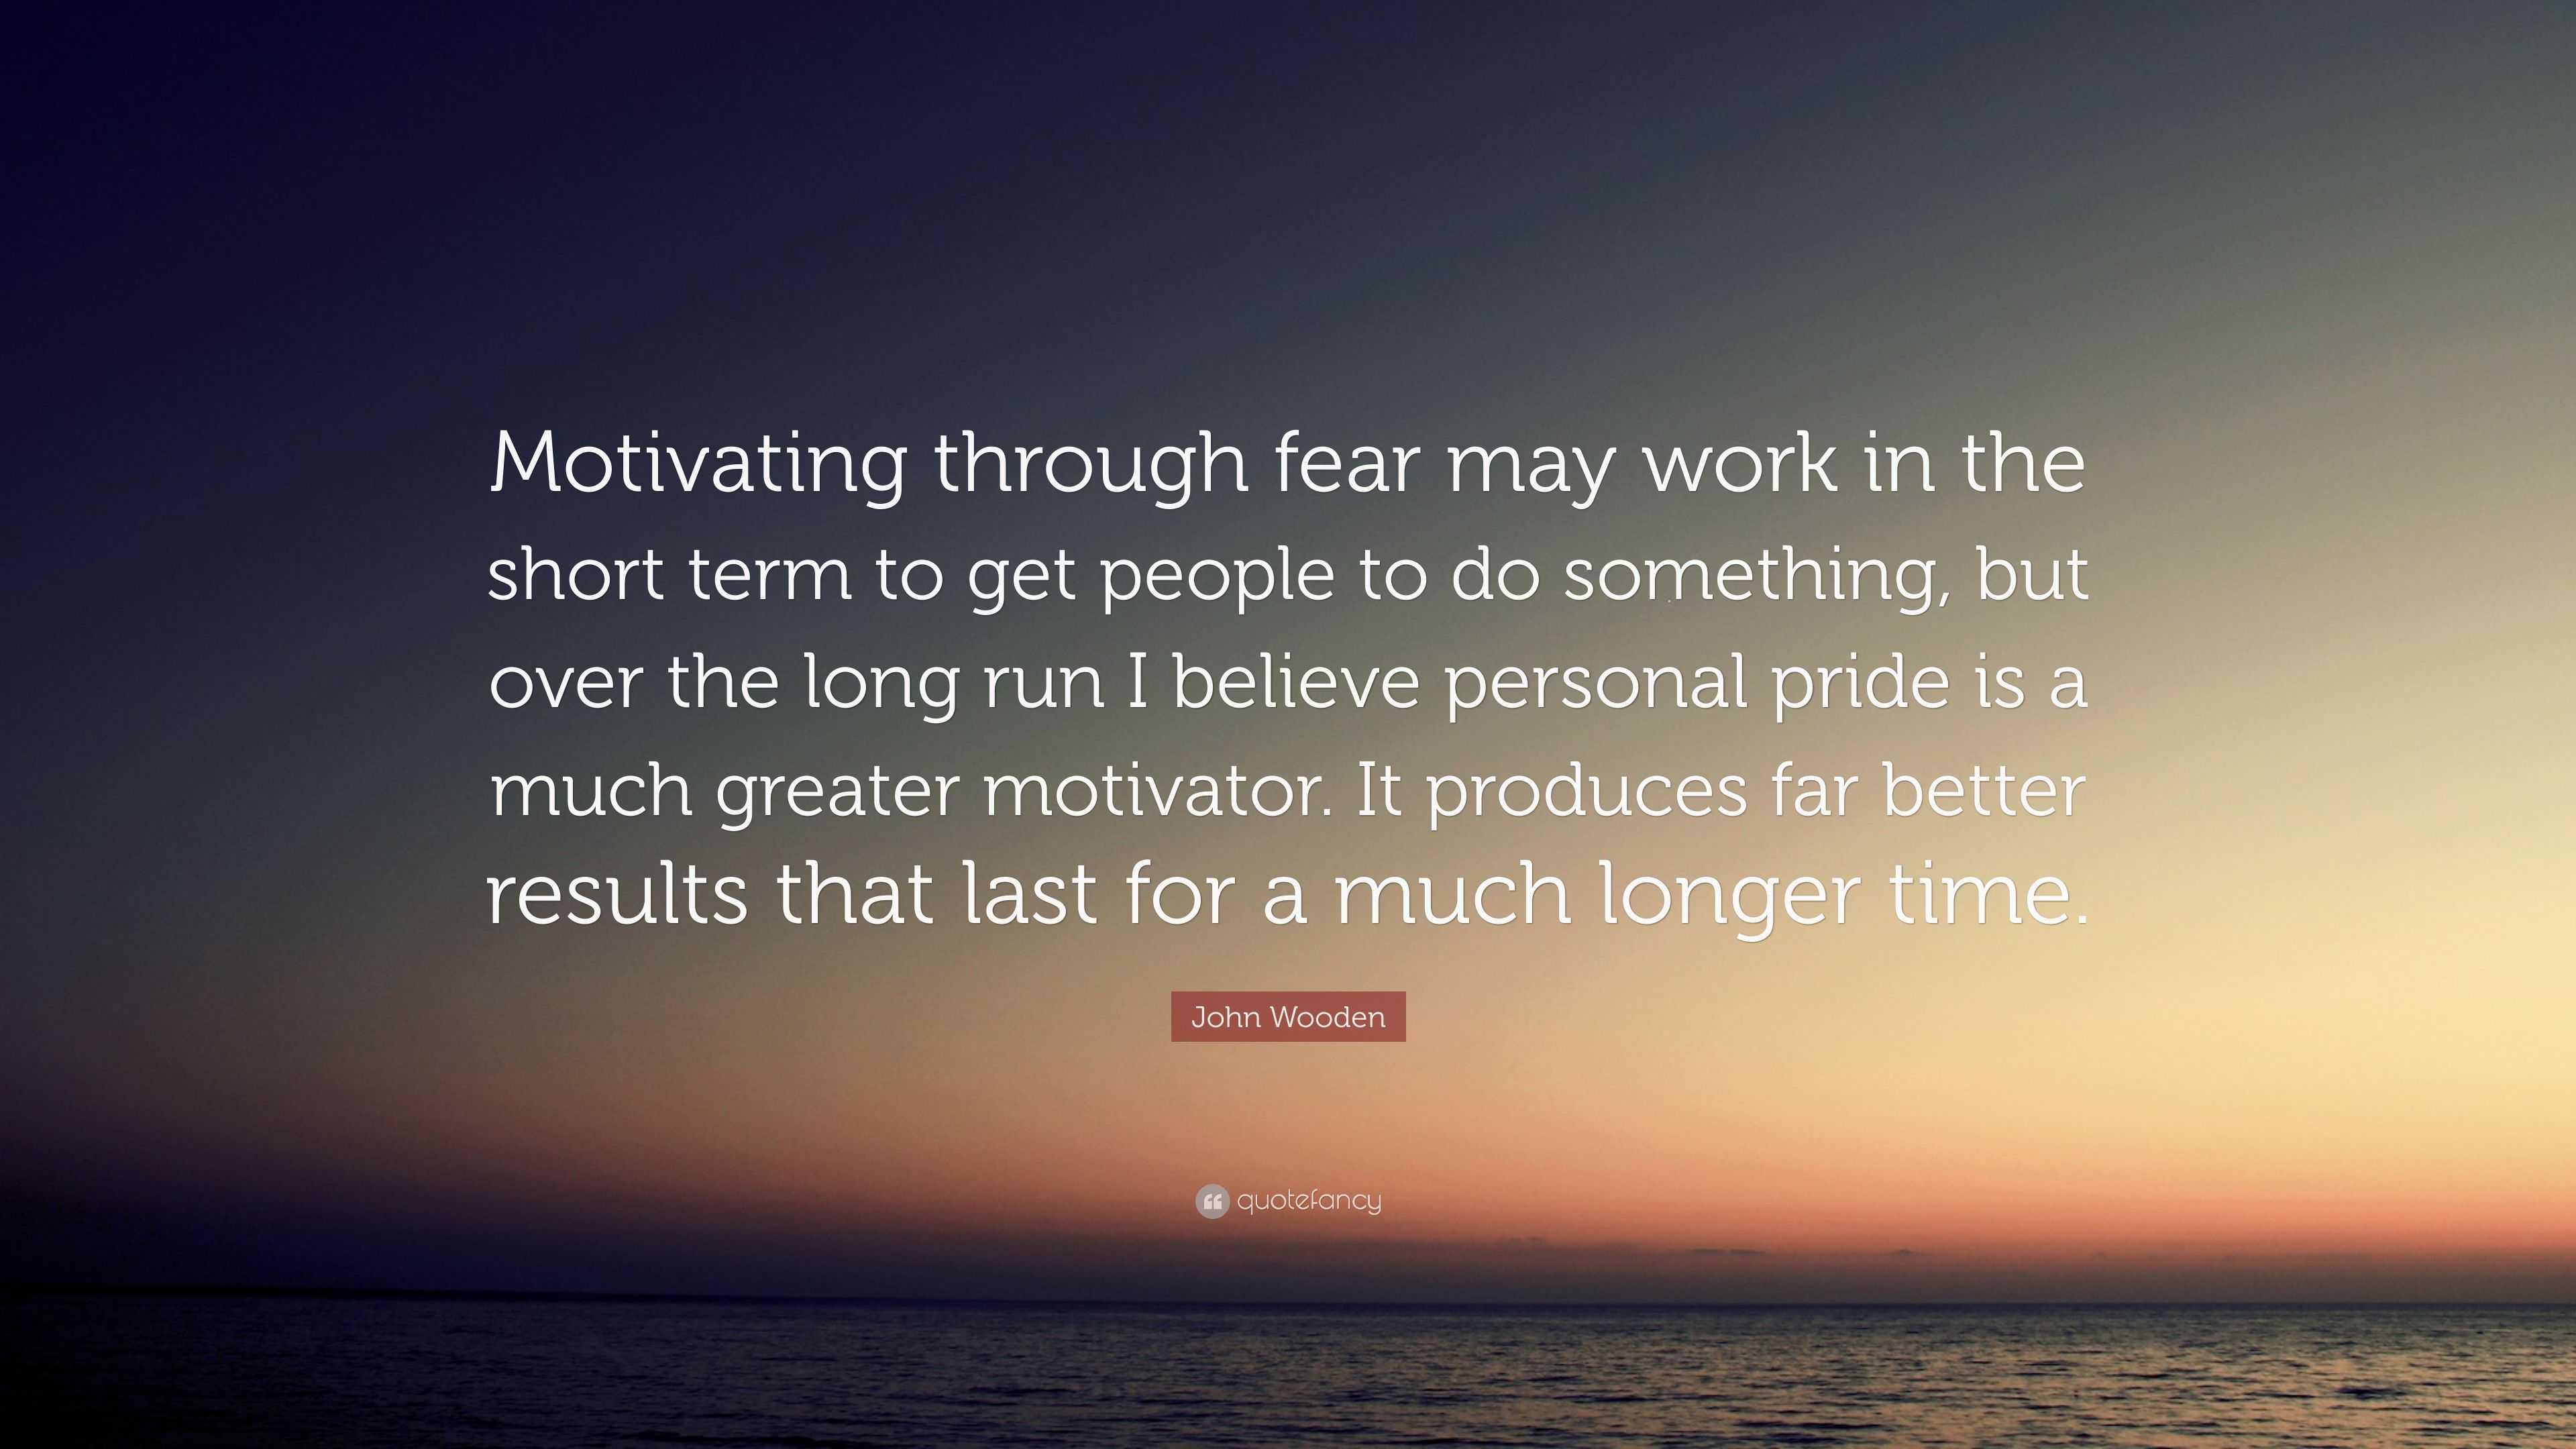 John Wooden Quote: “Motivating through fear may work in the short term